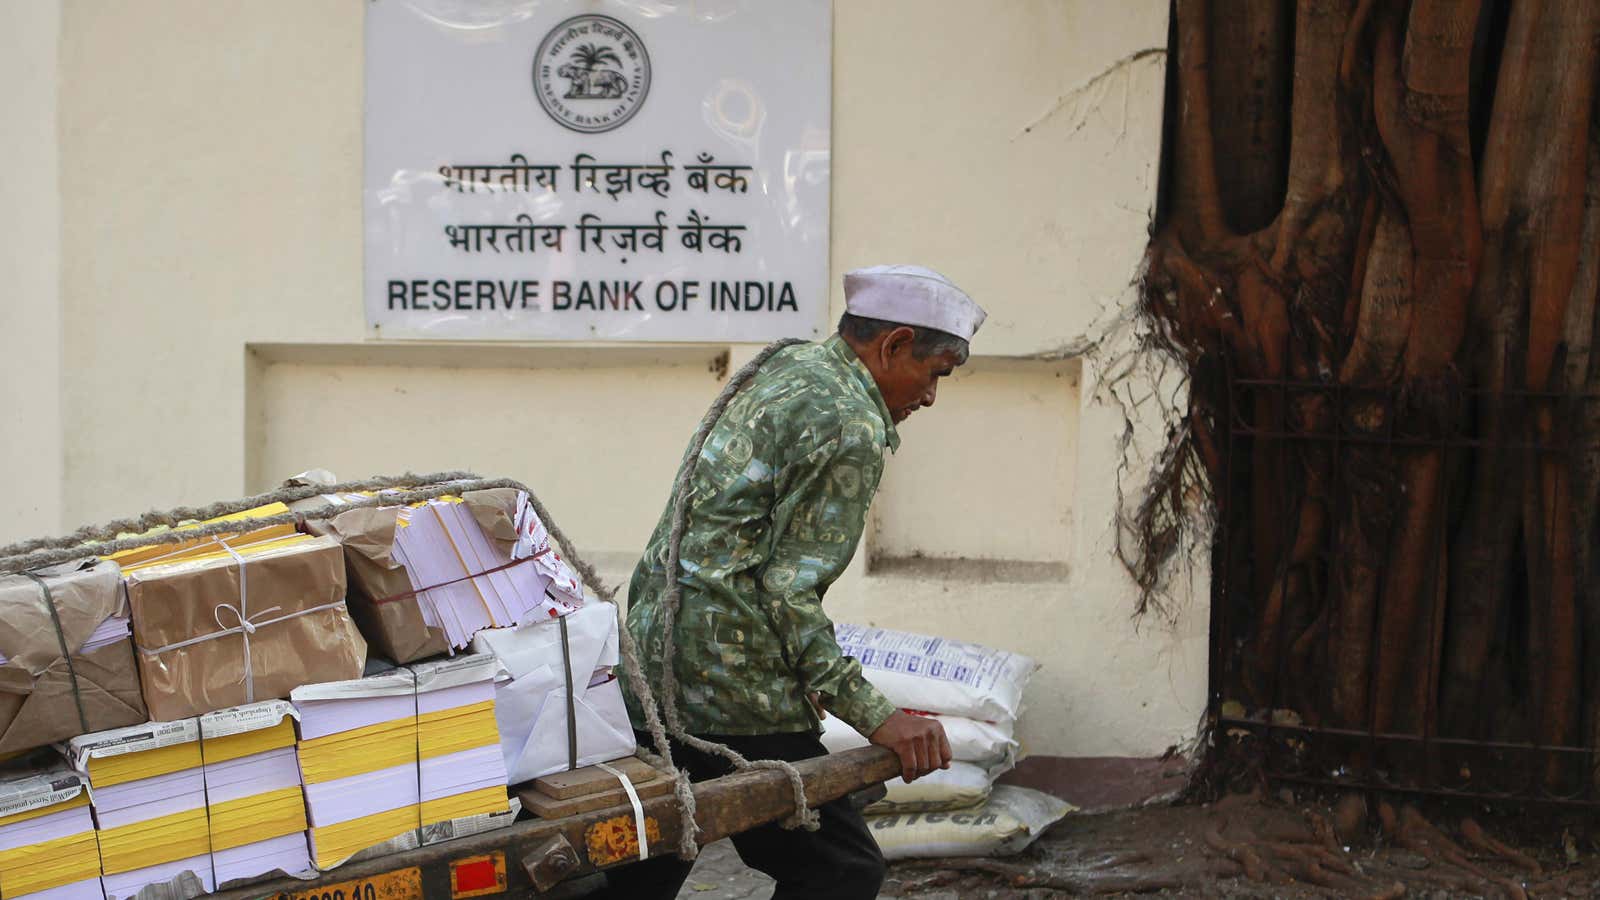 A snapshot of India’s economy ahead of a monetary policy review by its central bank